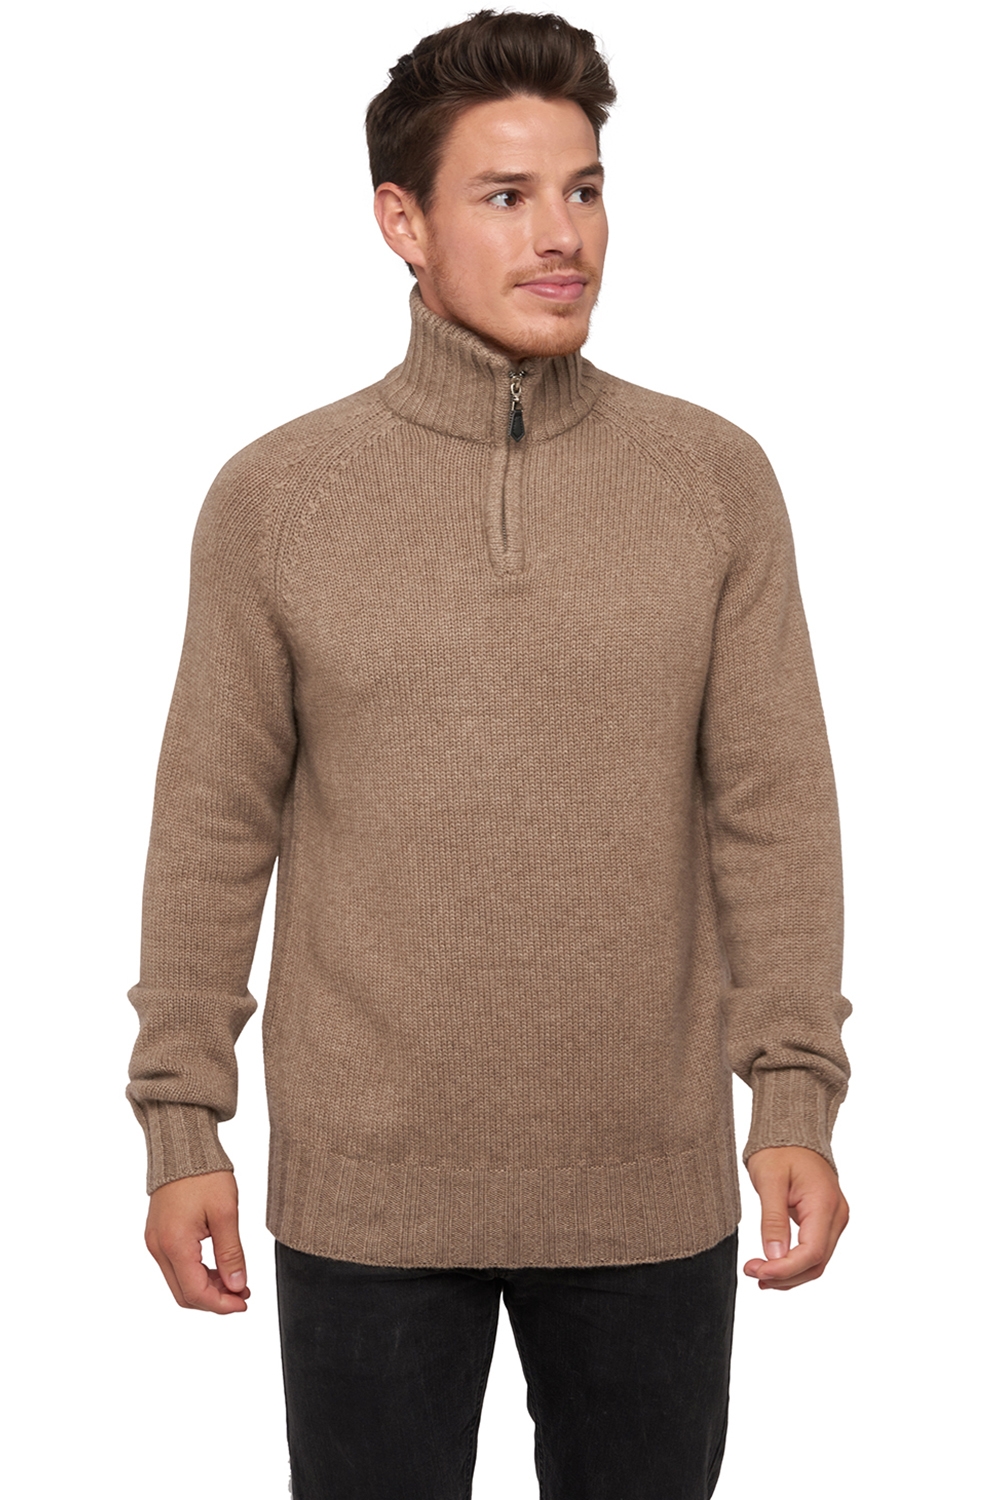 Cachemire Naturel pull homme natural viero natural brown s